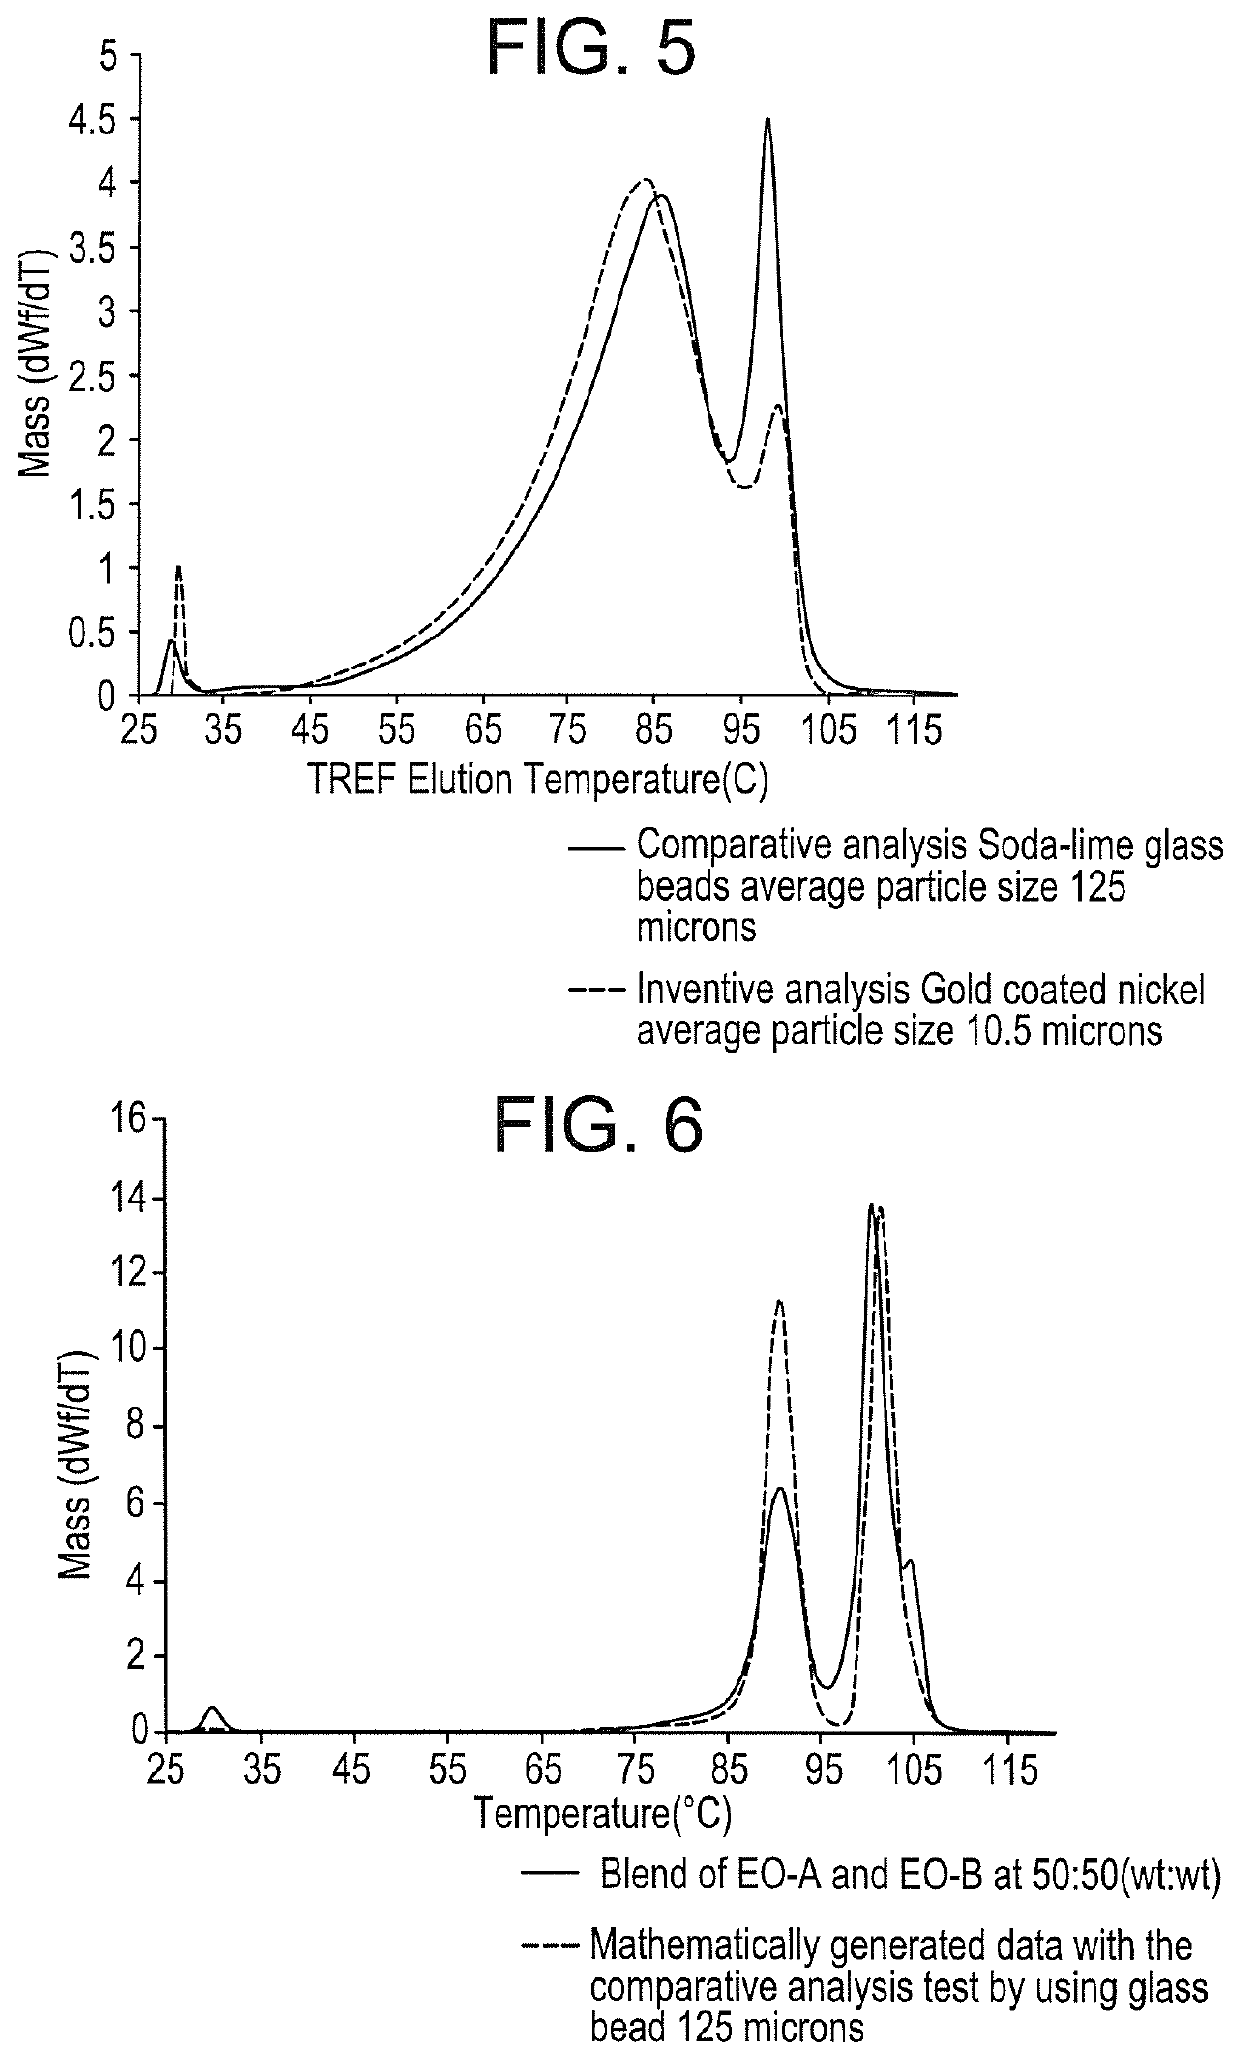 Chromatography of polymers with reduced co-crystallization